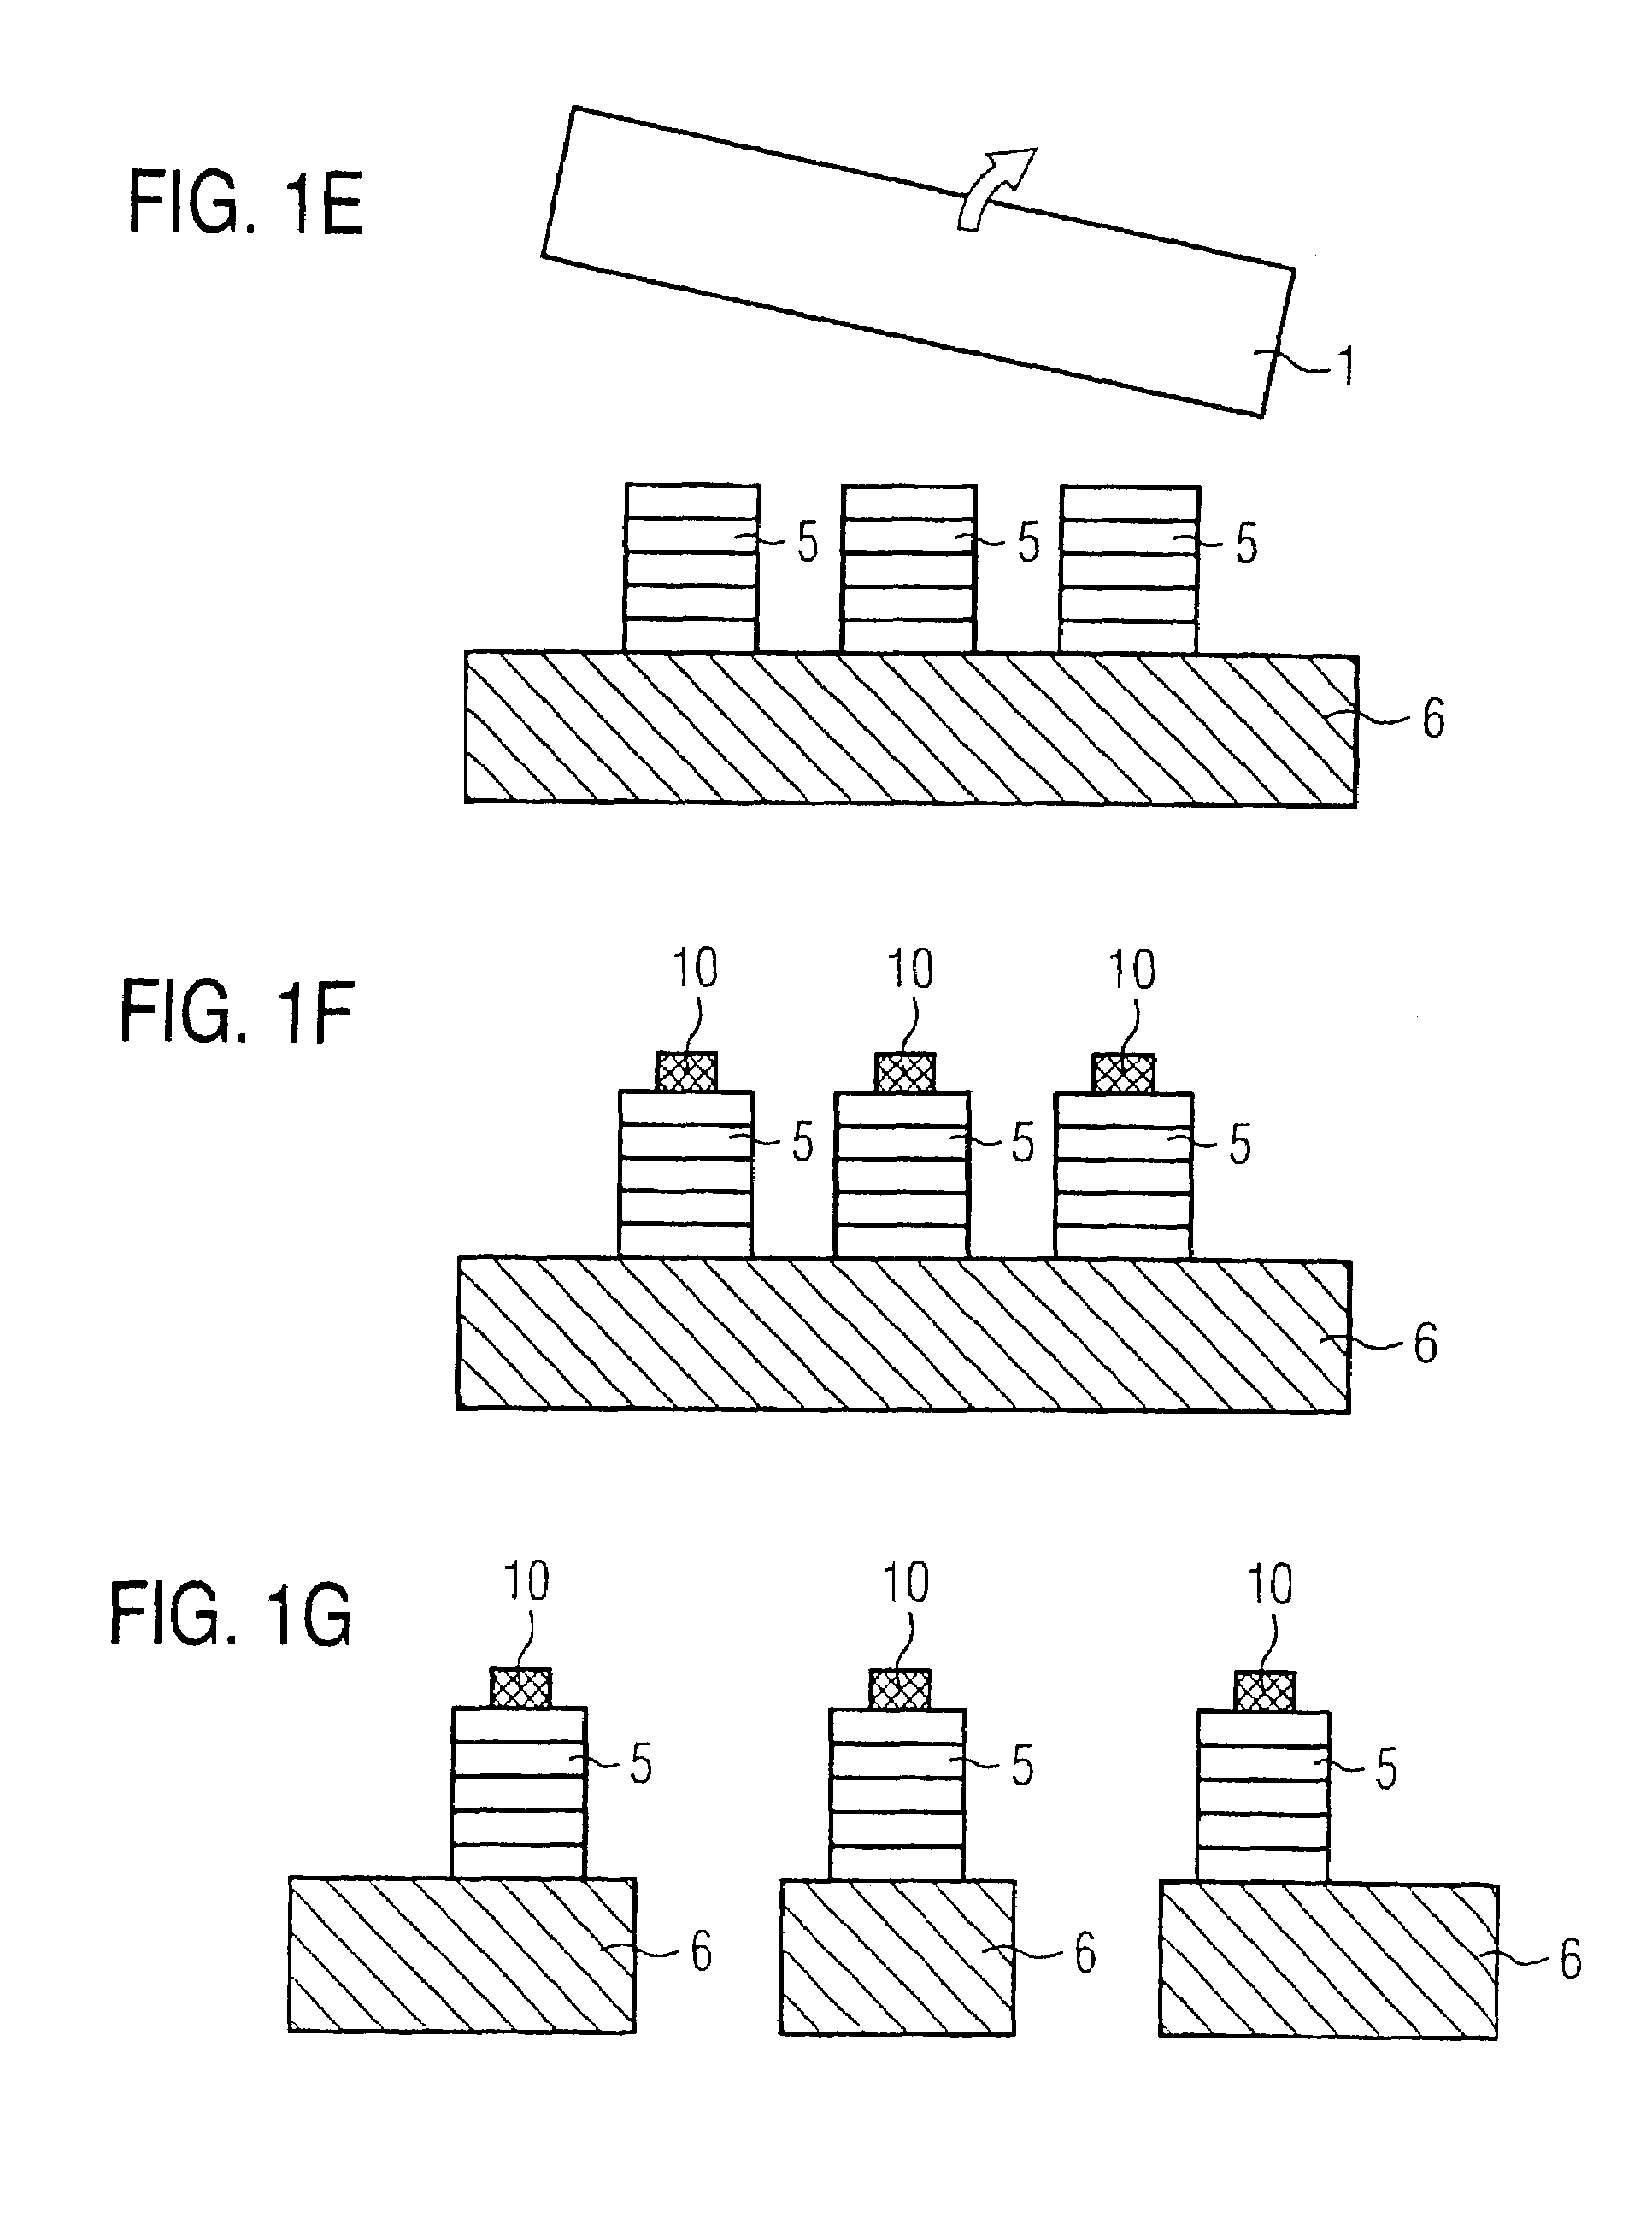 Method for fabricating a semiconductor component based on GaN